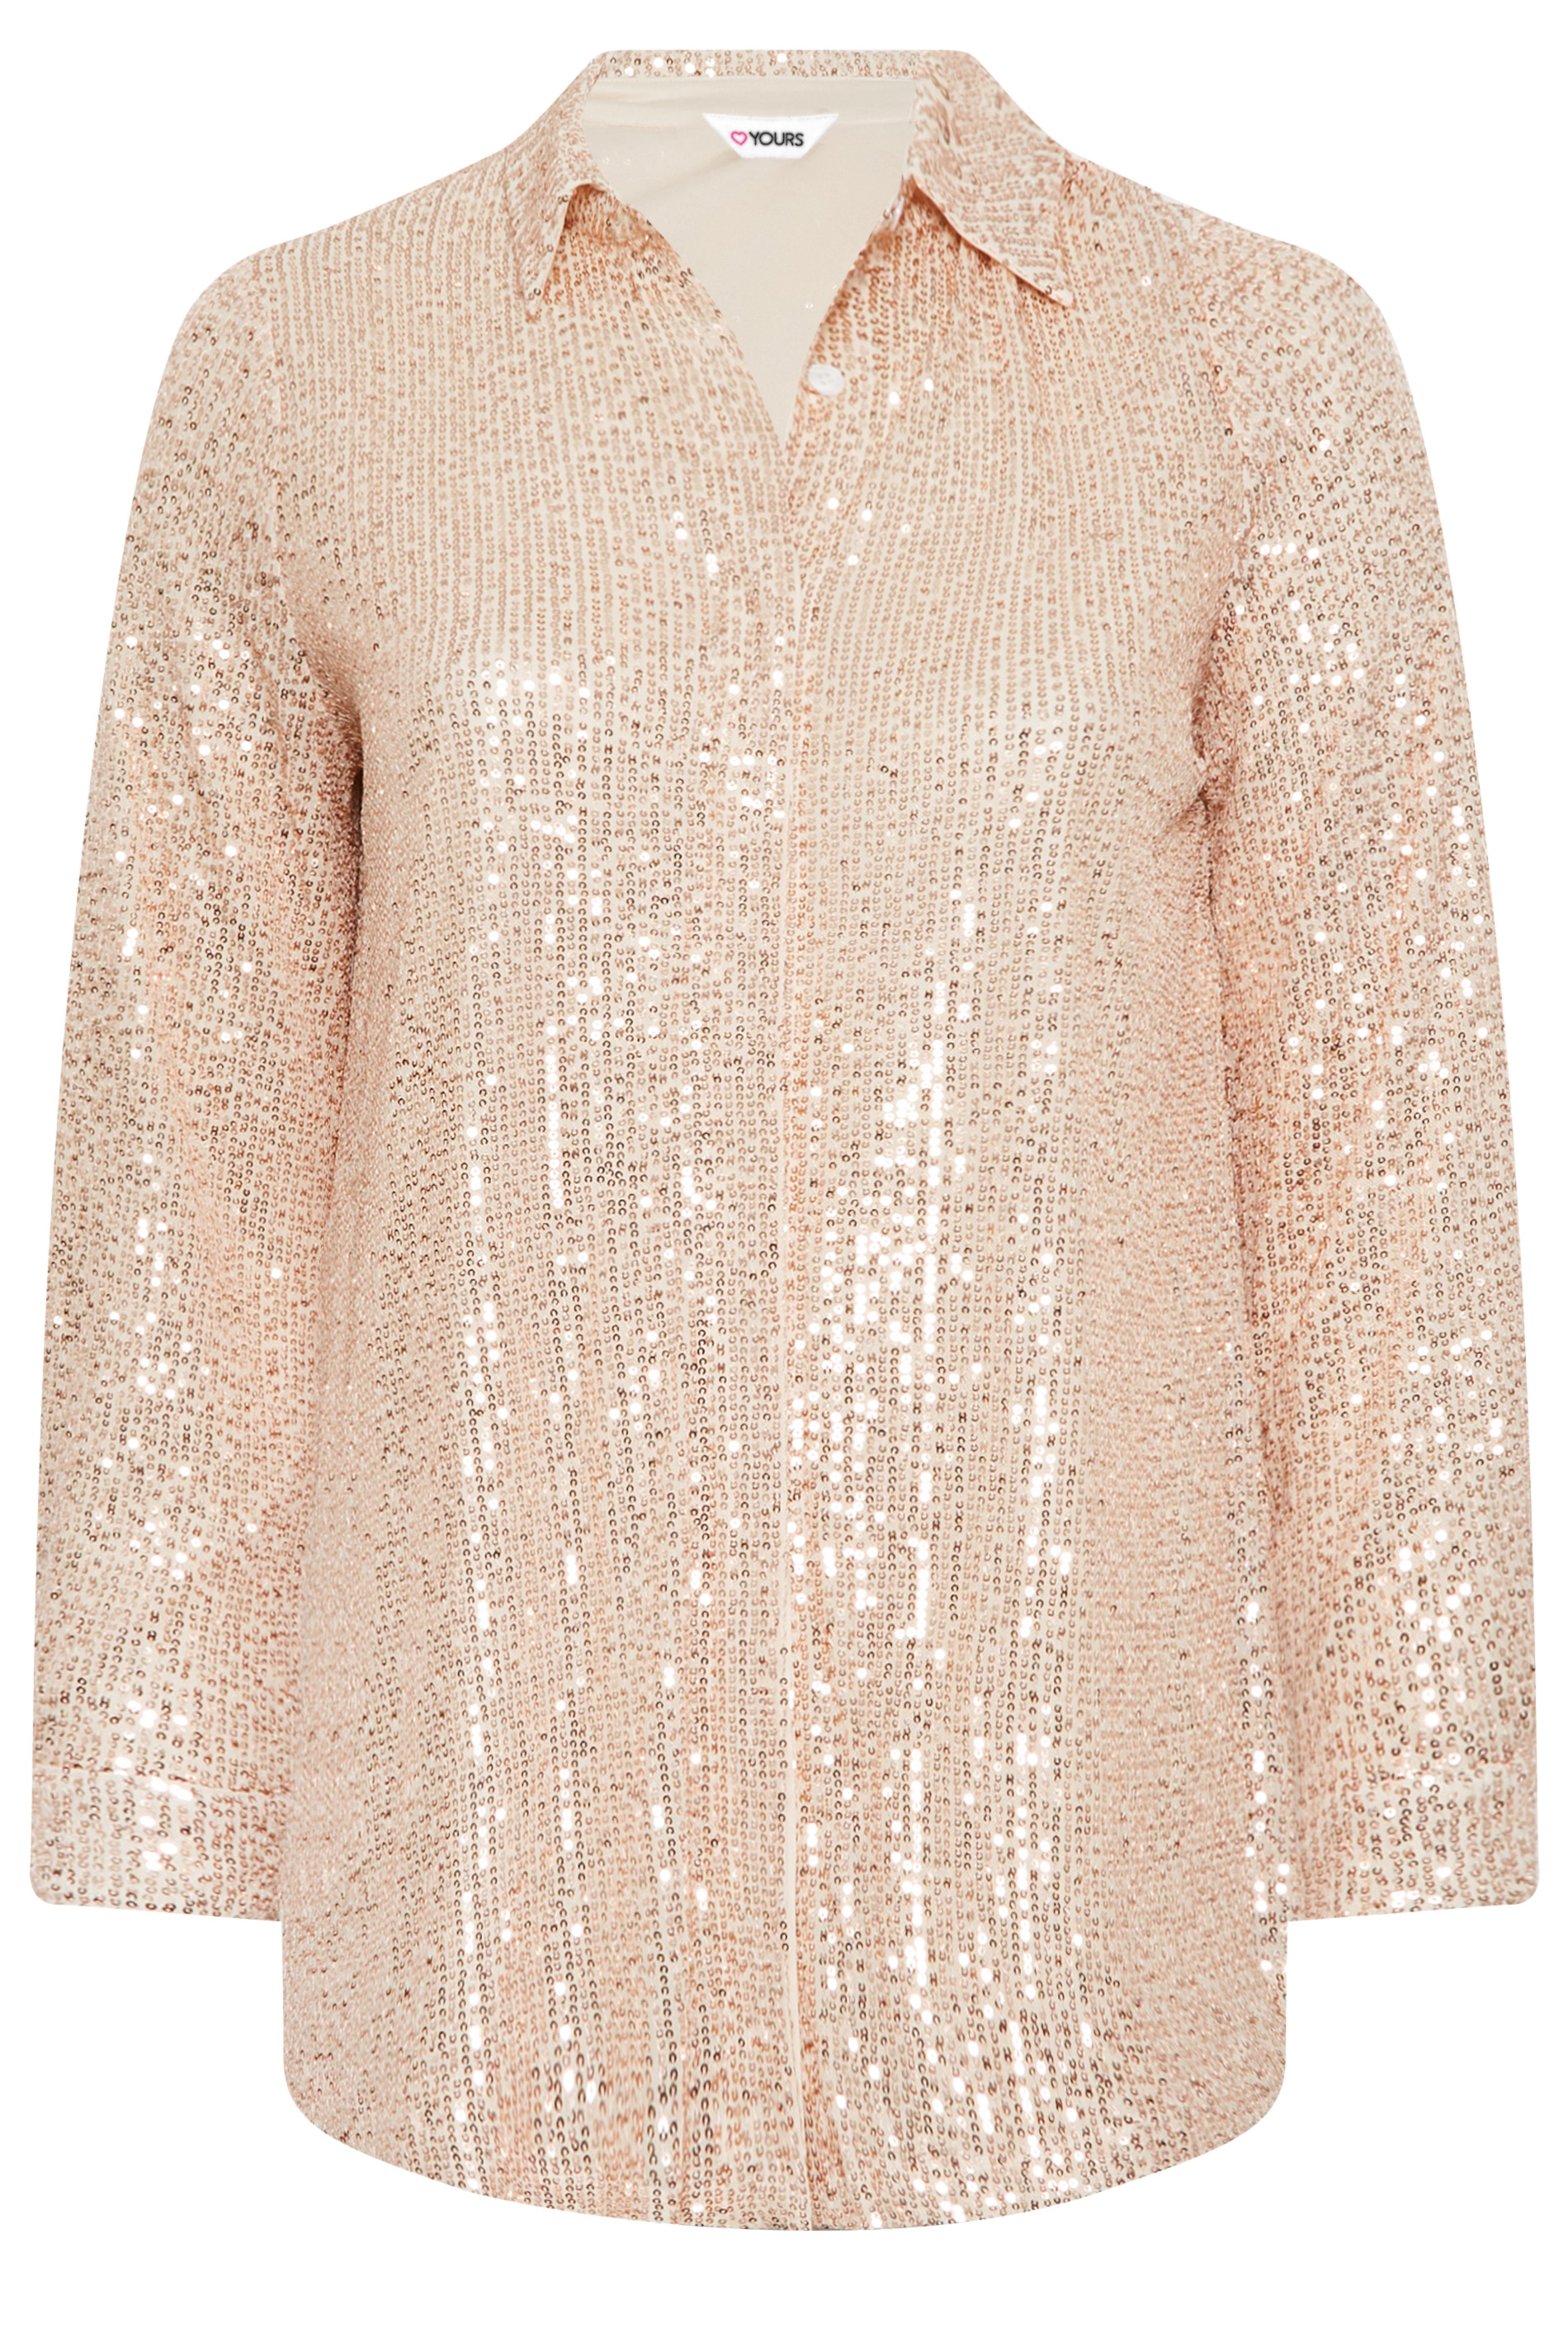 YOURS LONDON Plus Size Gold Sequin Embellished Shirt